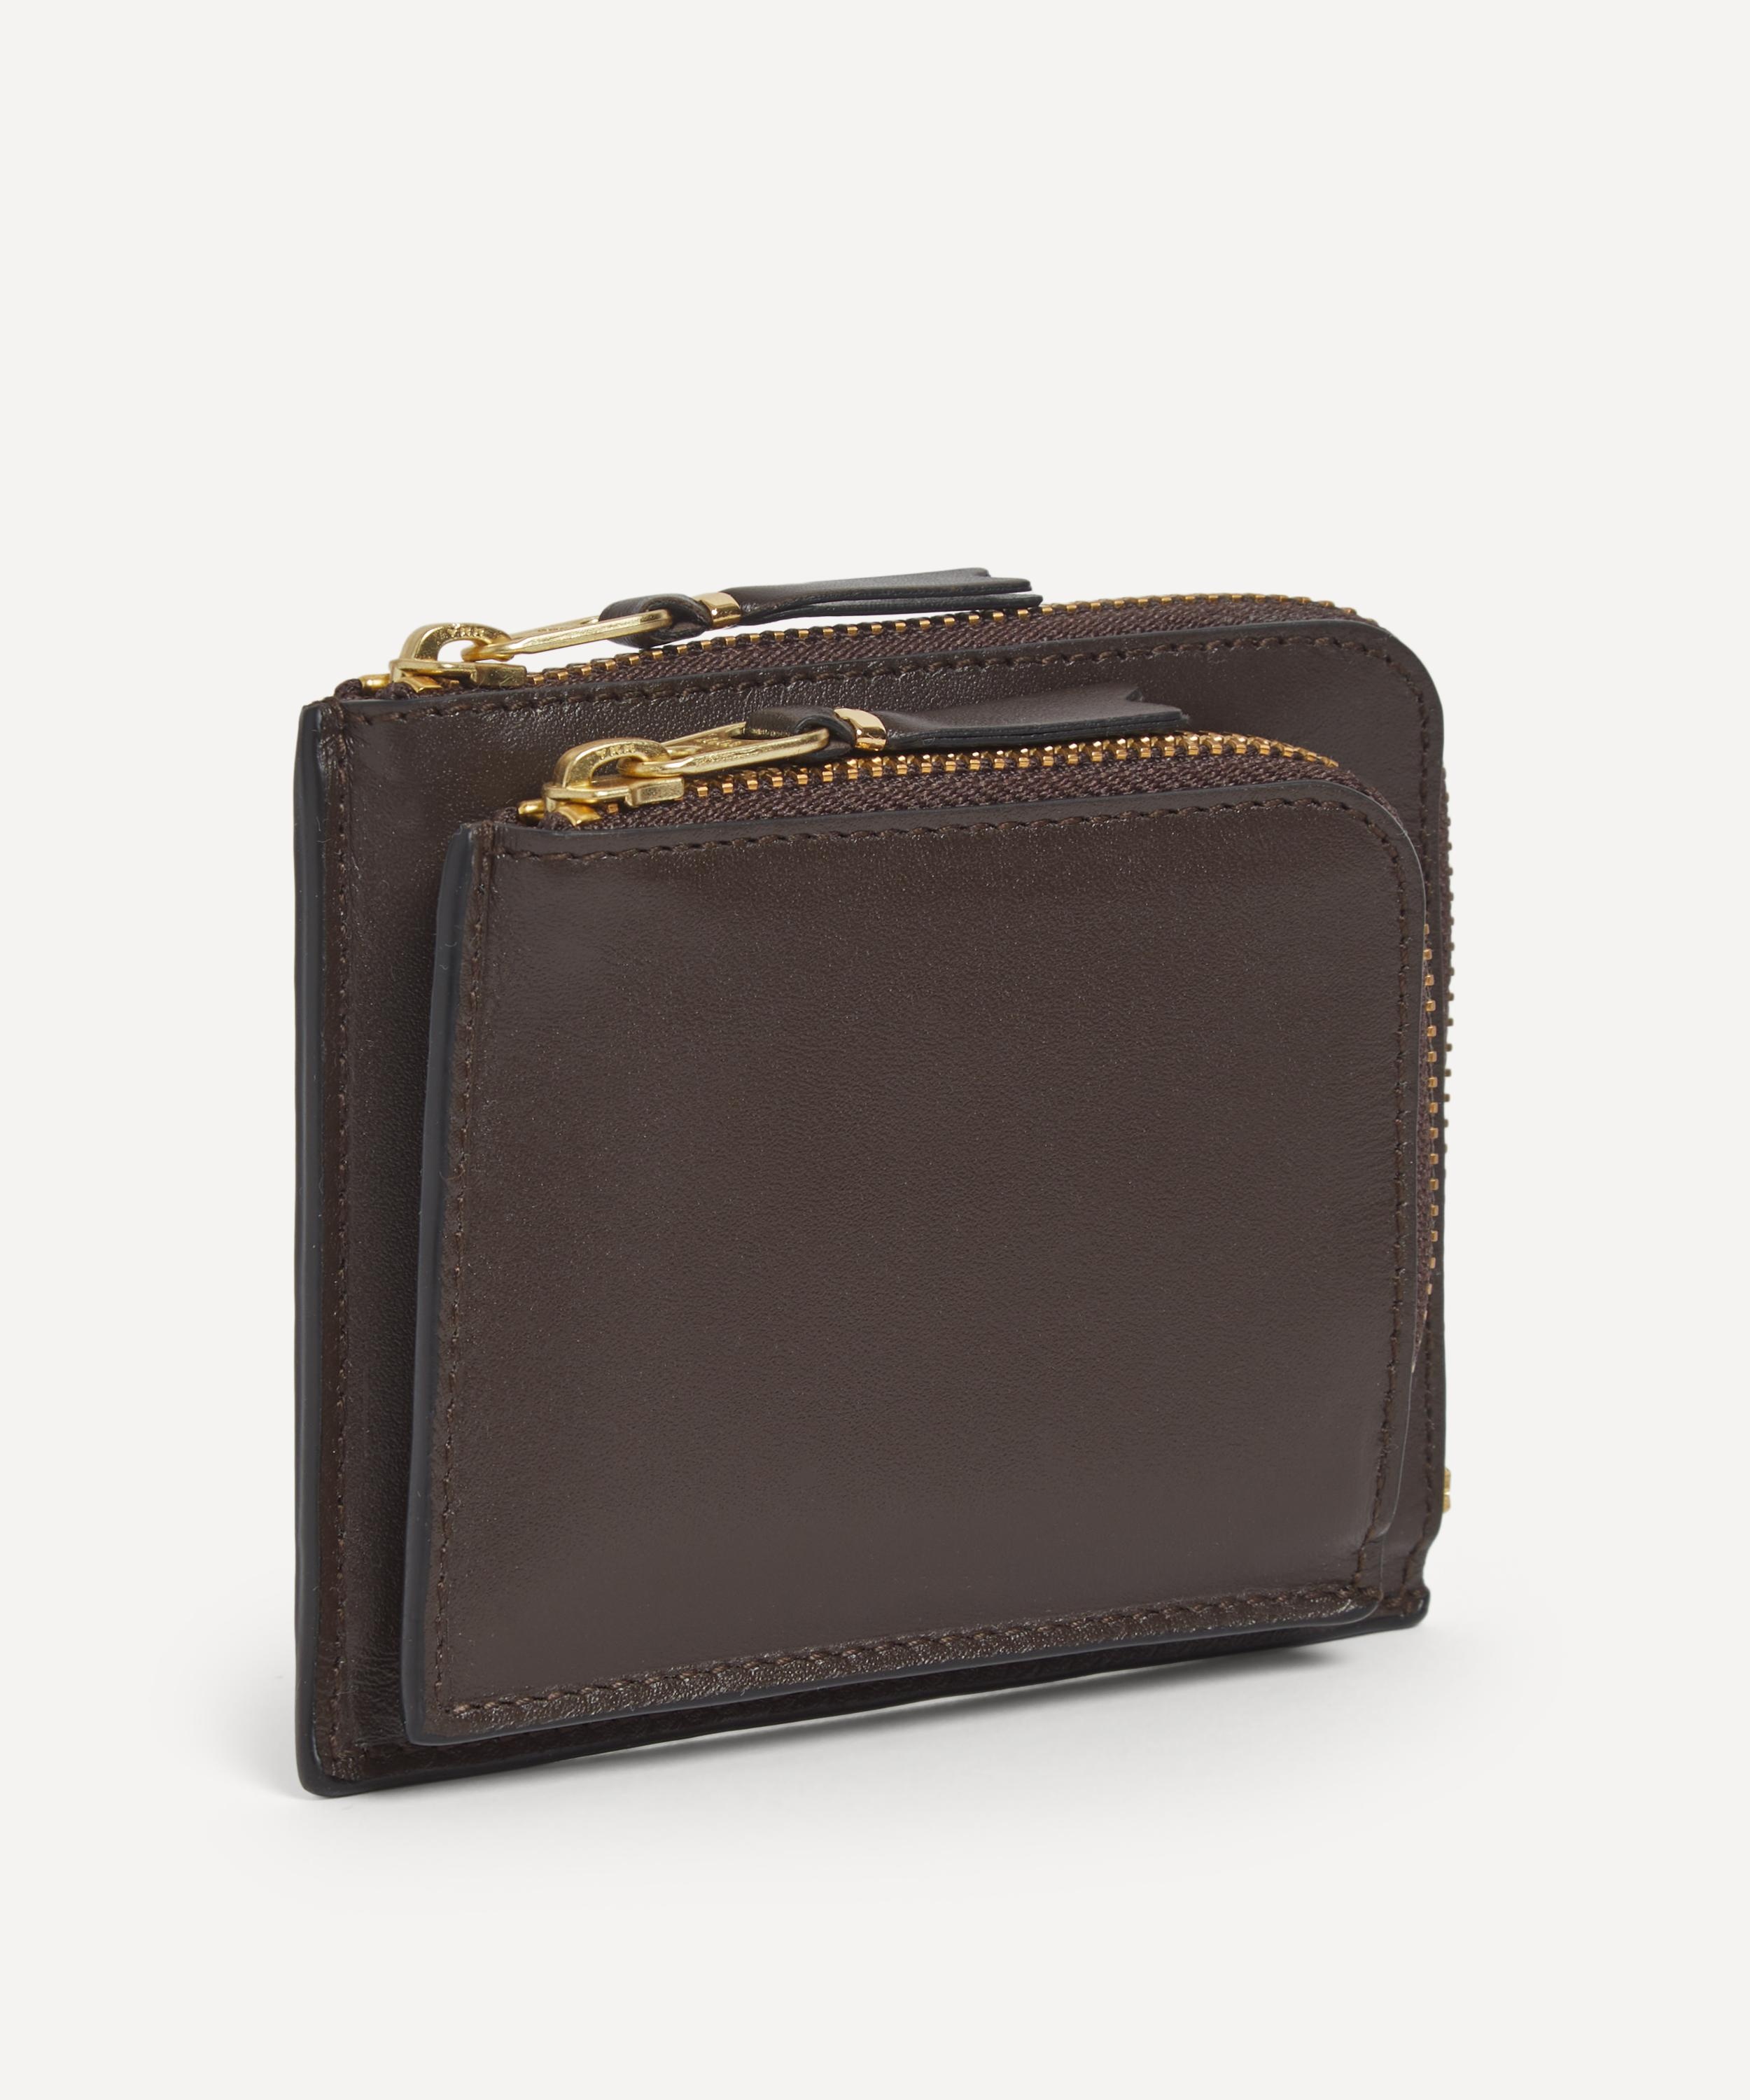 Outside Pocket Line Zip Around Leather Wallet - 2